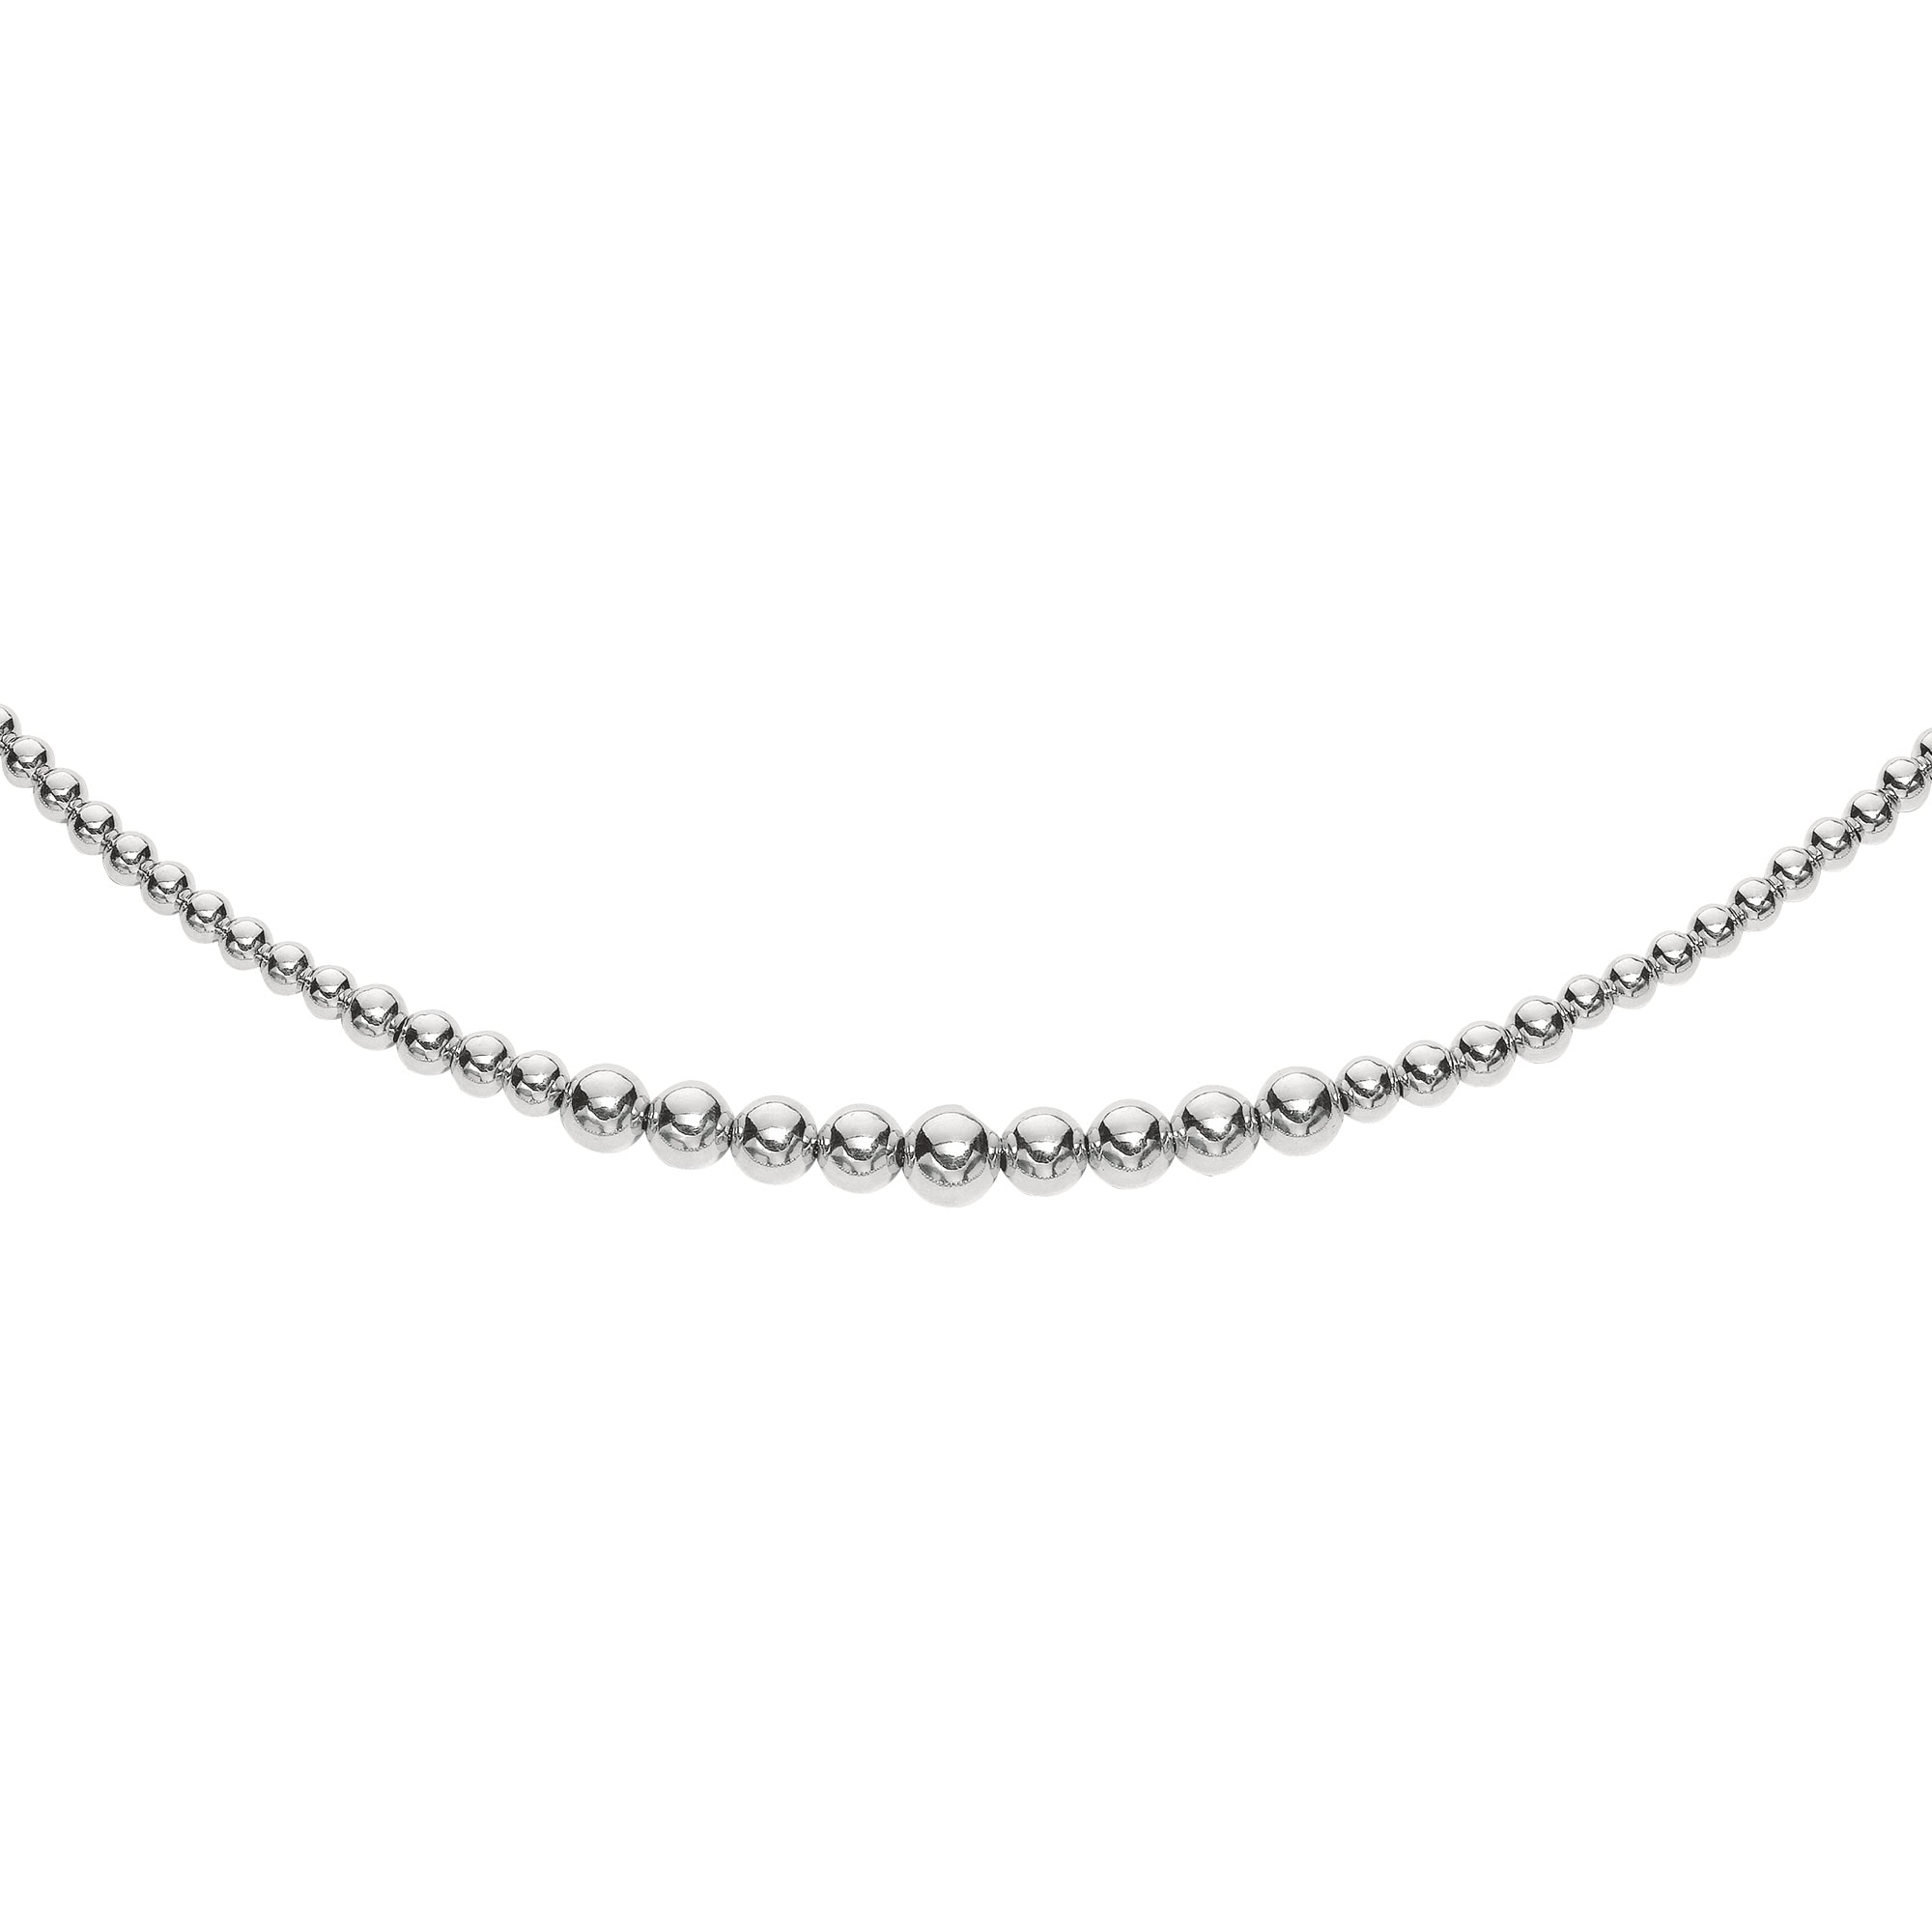 Silver Graduated 5 to 8mm Bead Necklace